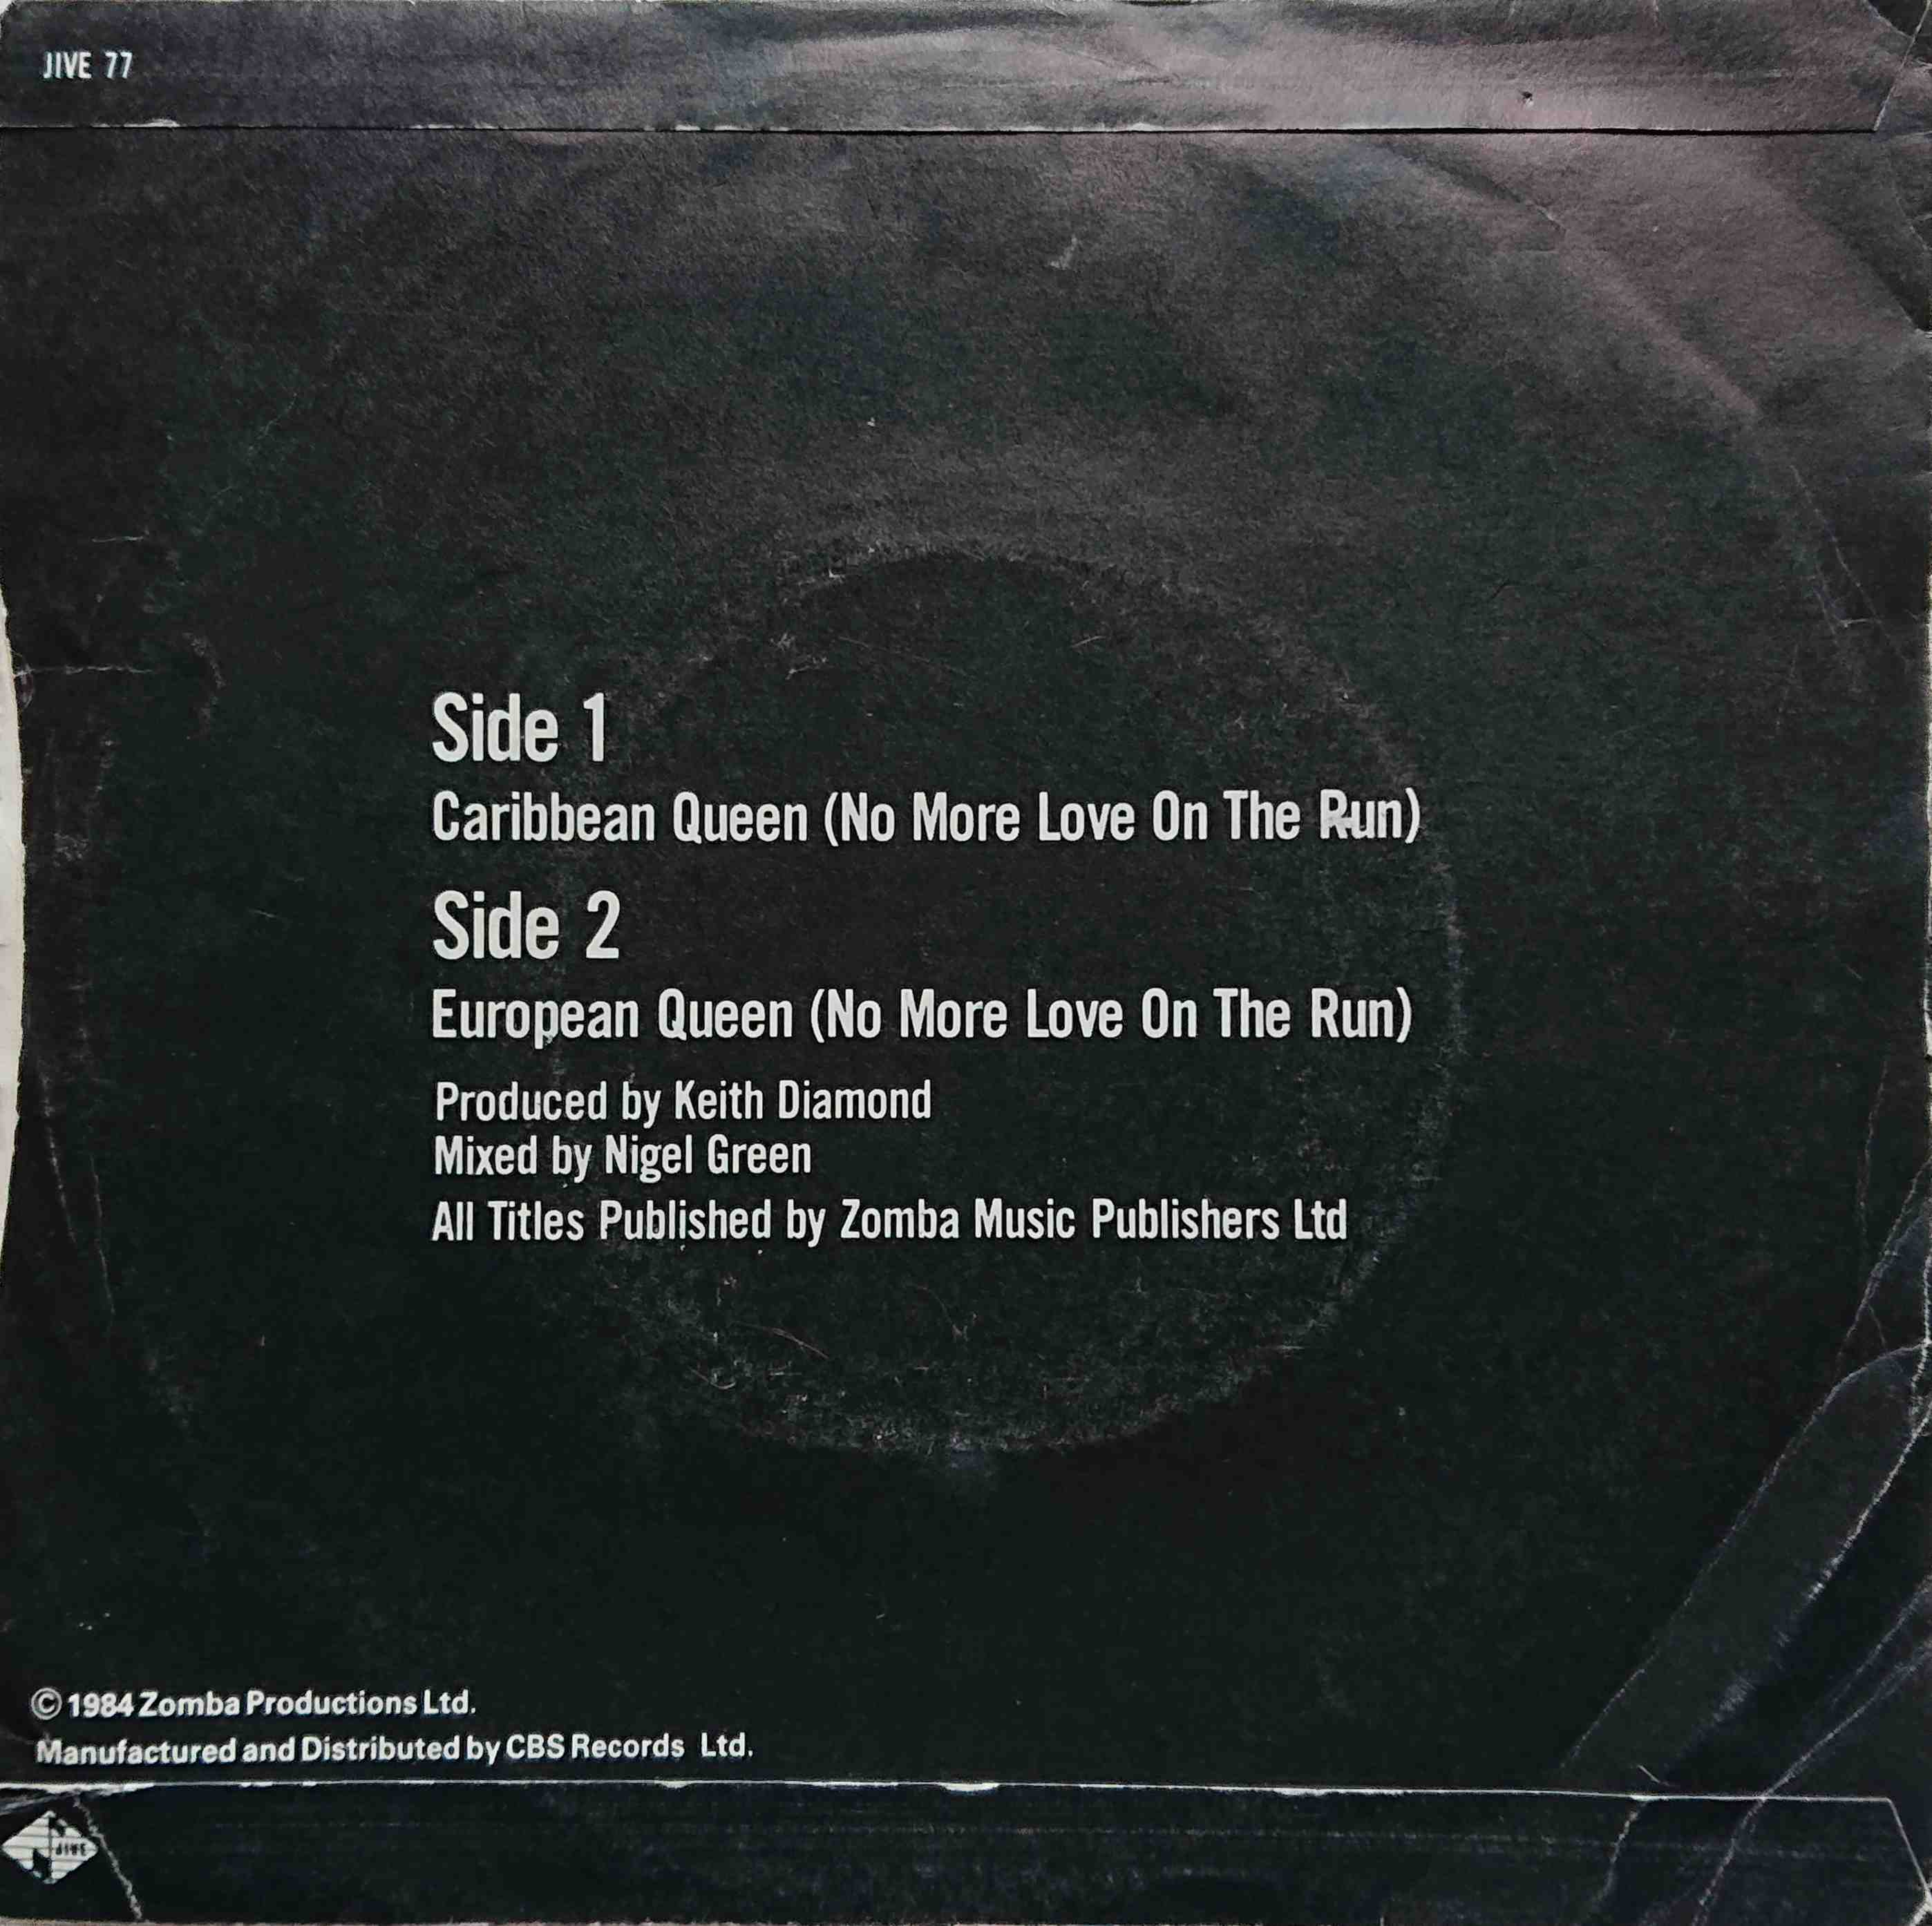 Back cover of JIVE 77